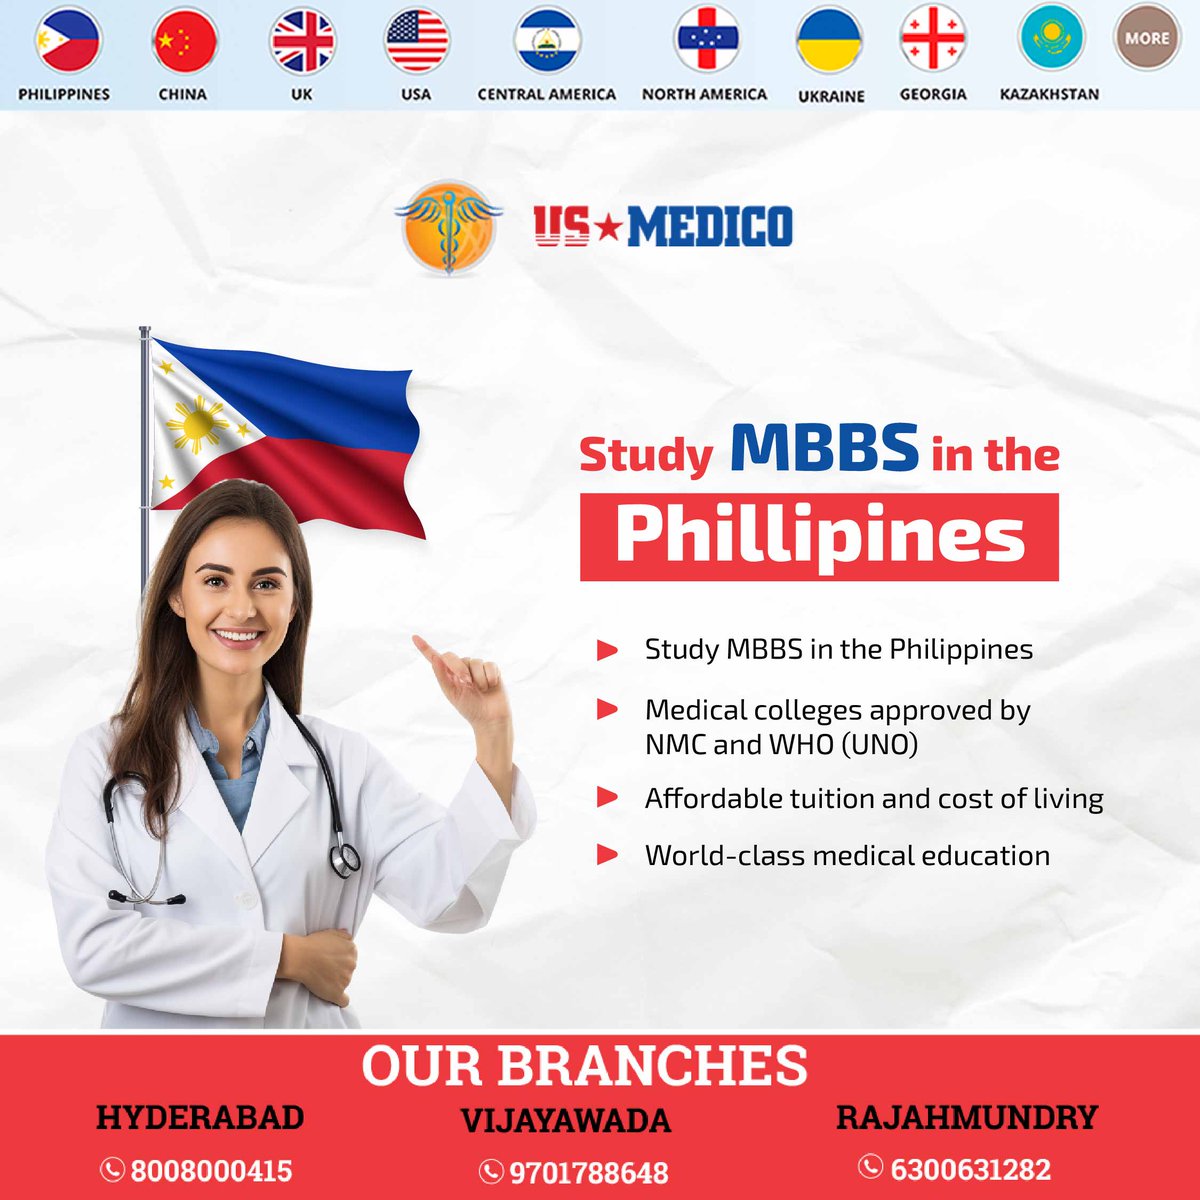 Embark on your MBBS journey in the Philippines, renowned for NMC and WHO-approved medical colleges, affordability, and world-class education

contact us:8008000415

#MBBSinphilippines #medicaleducation #NMCapproved #WHOapproved #affordableeducation #studyabroad #medicalcolleges